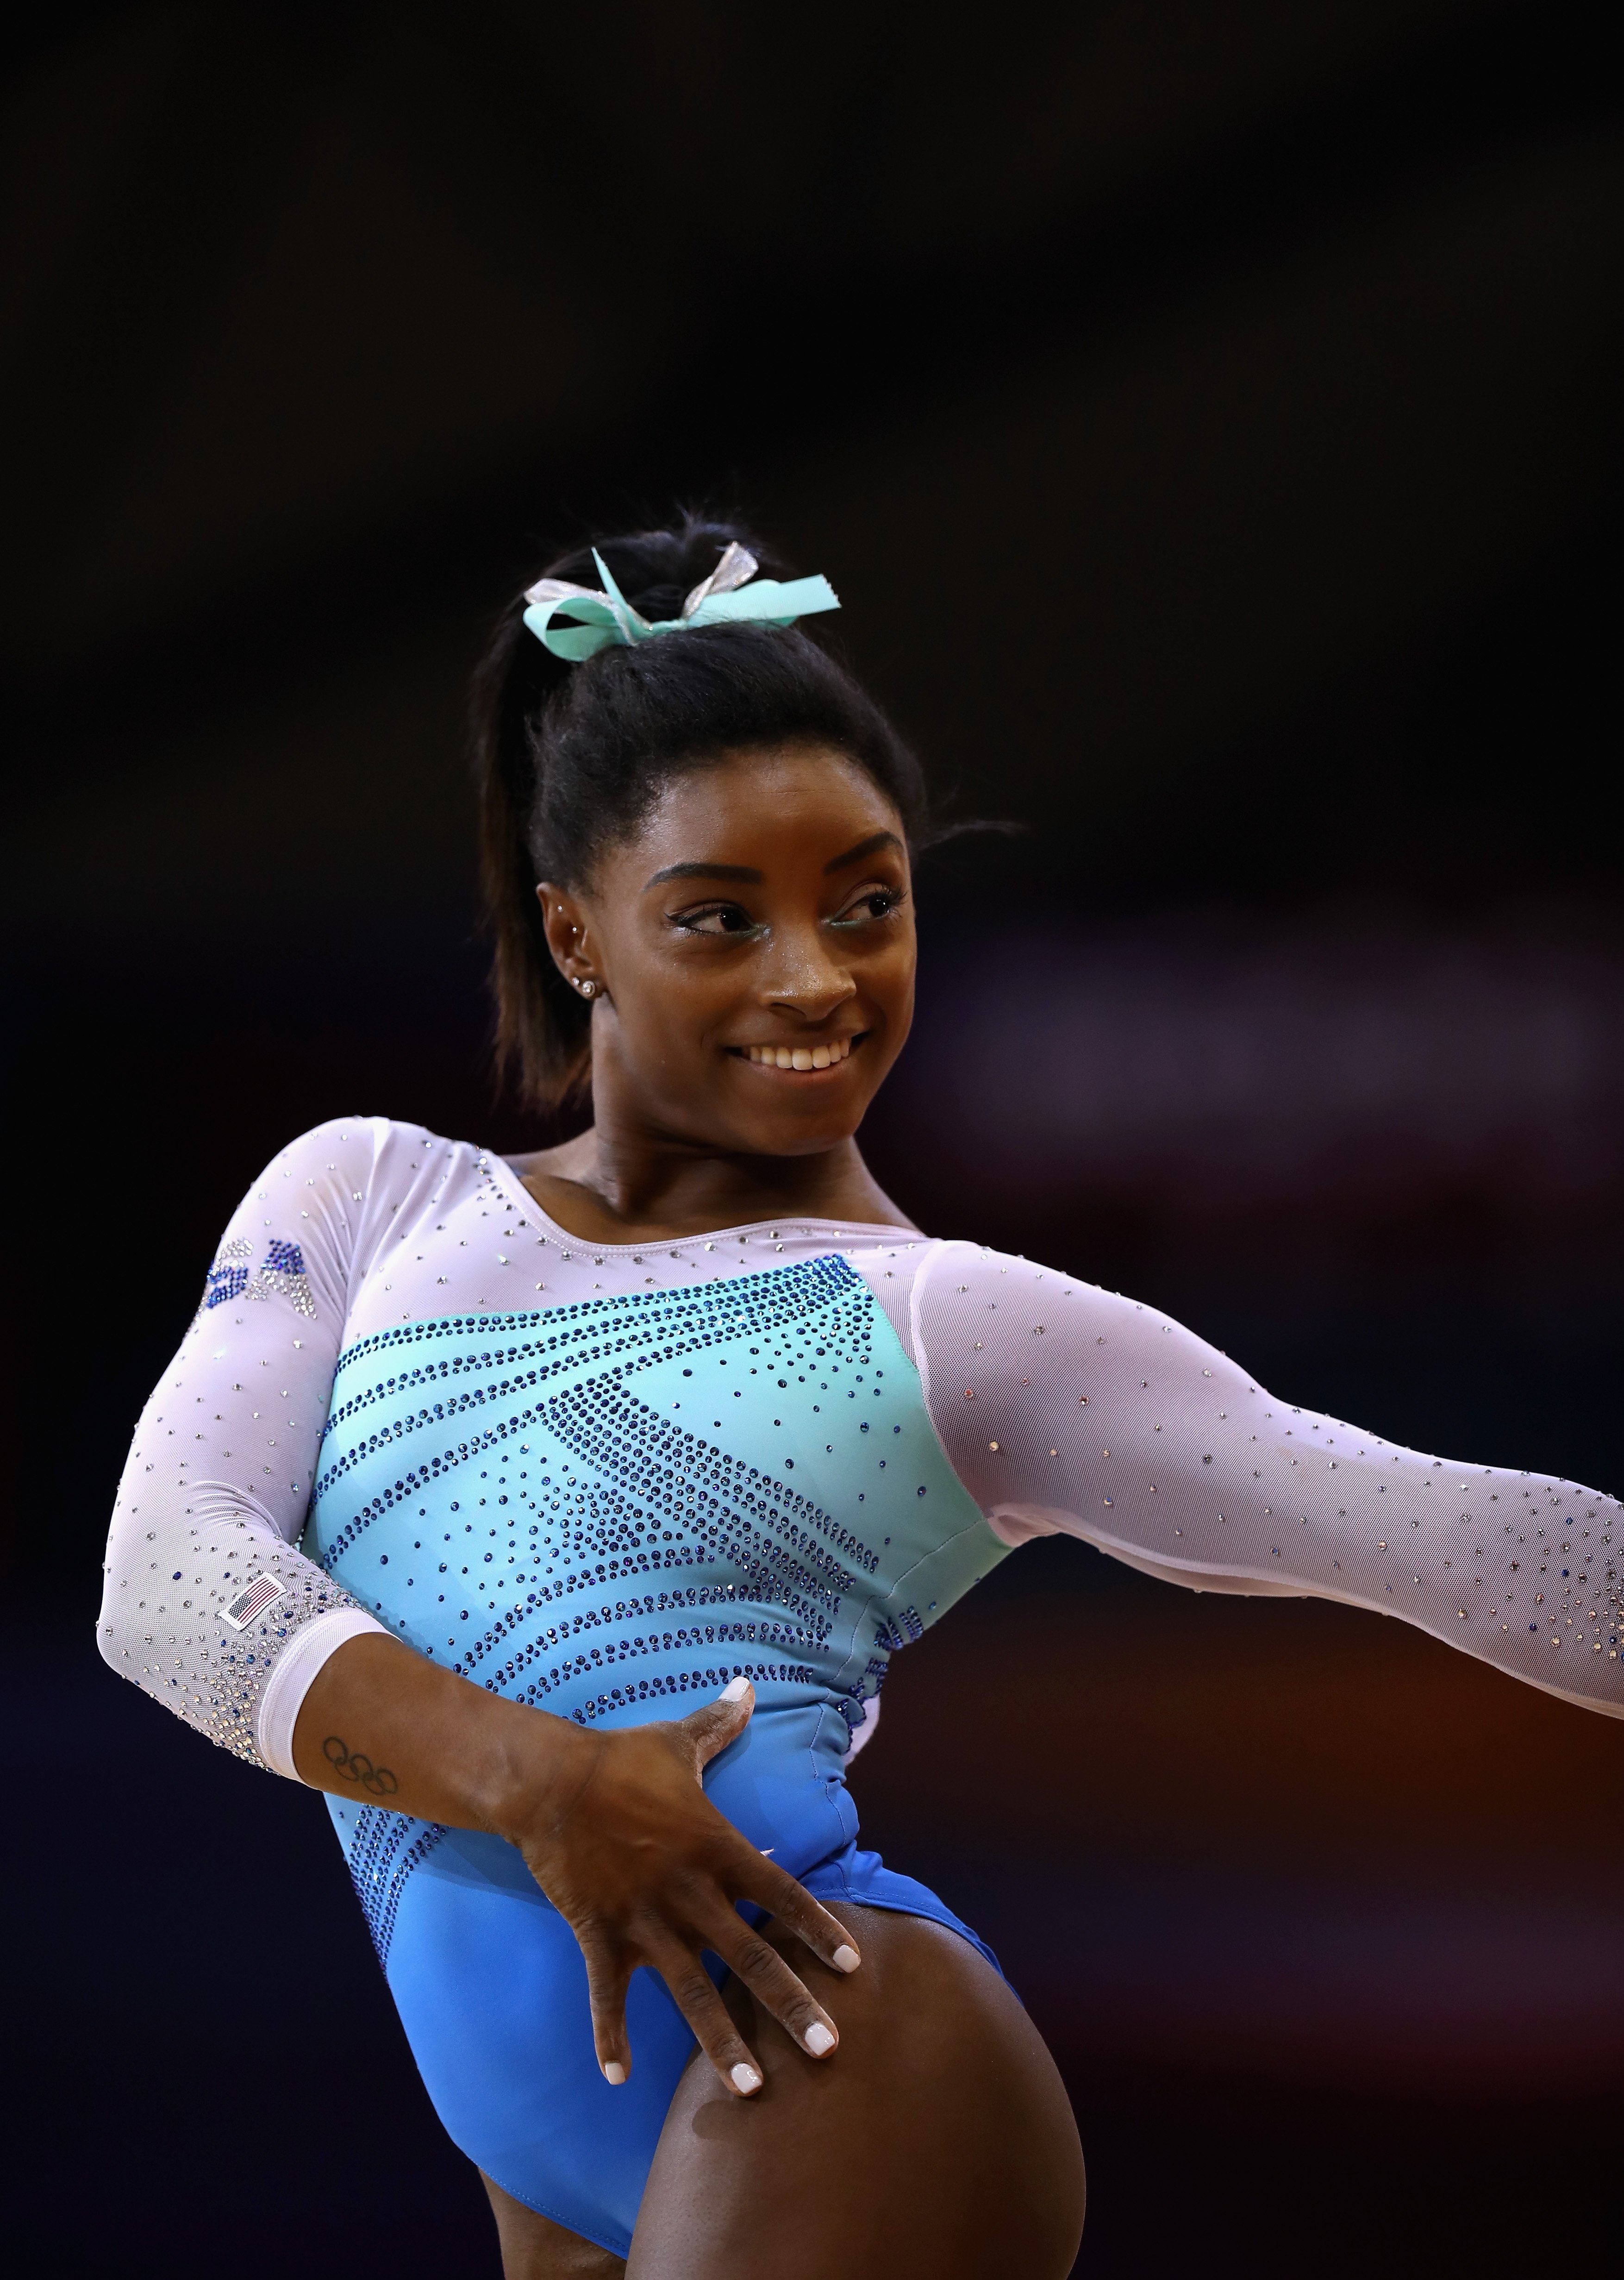 Simone Biles representing the US at the 2018 FIG Artistic Gymnastics Championships in Qatar on November 1, 2018. | Photo: Getty Images